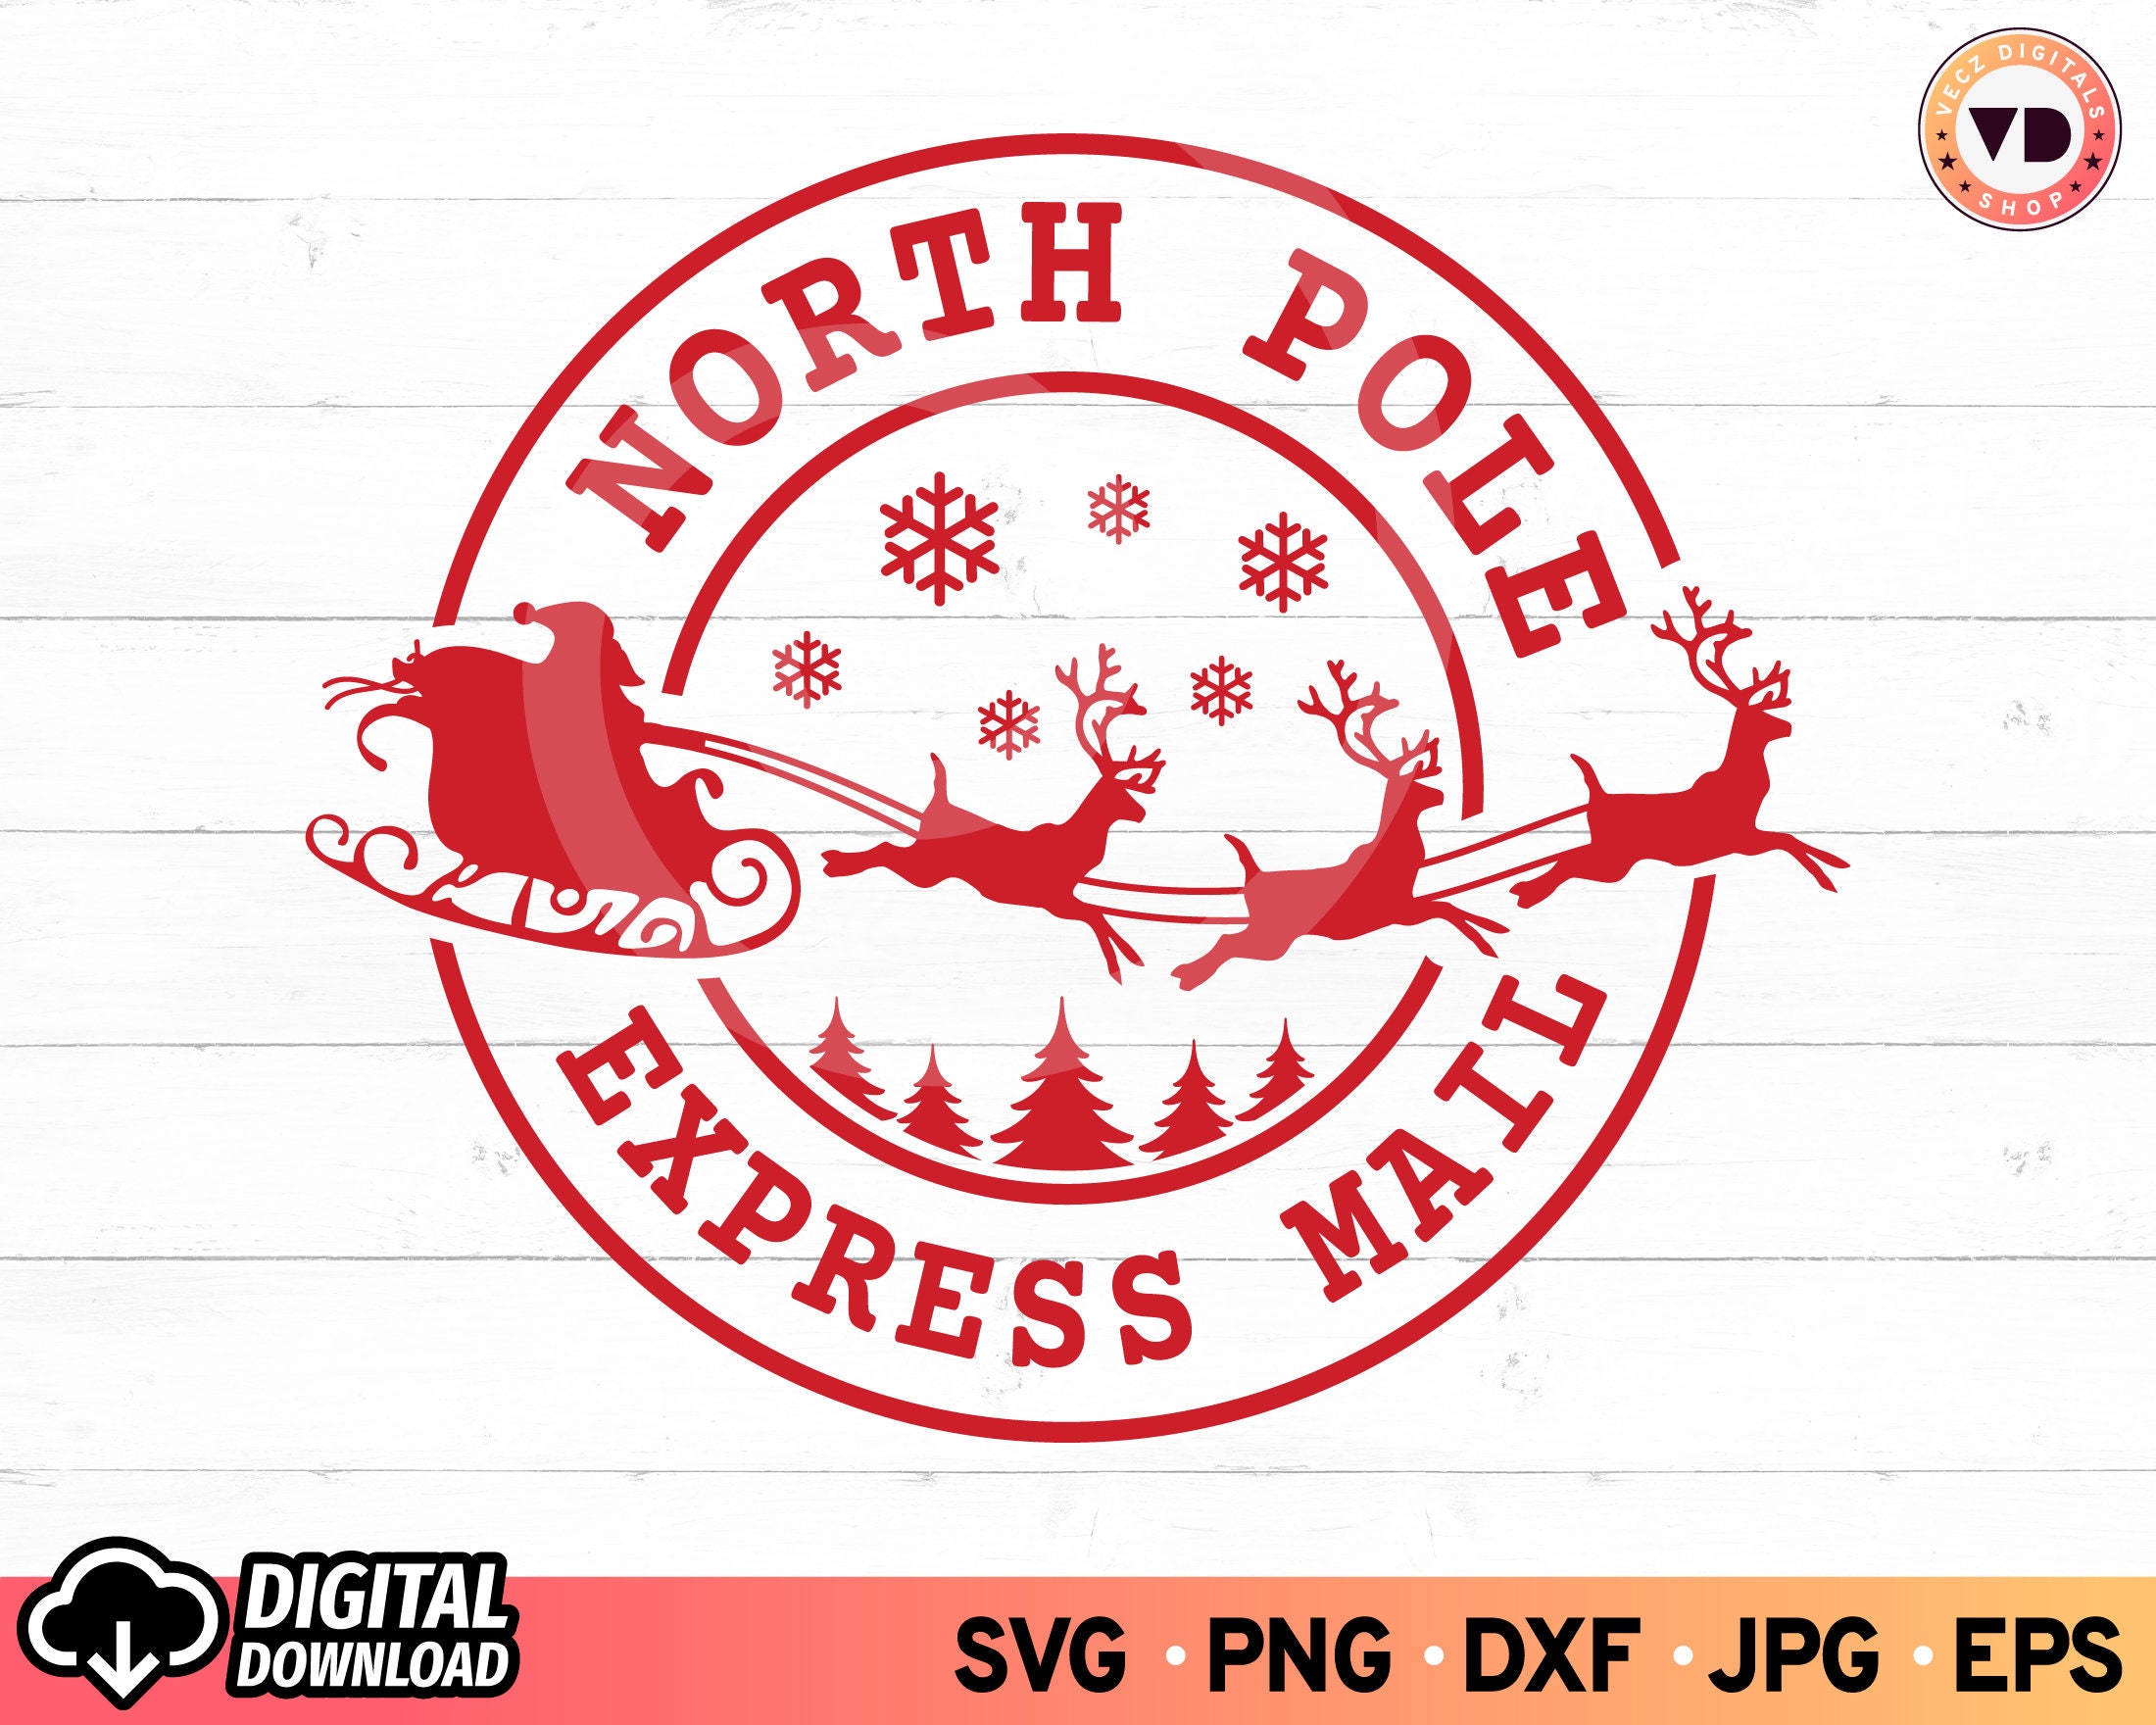 North Pole Post Special Delivery V1 Personalized Christmas Gift Delivery  Sack